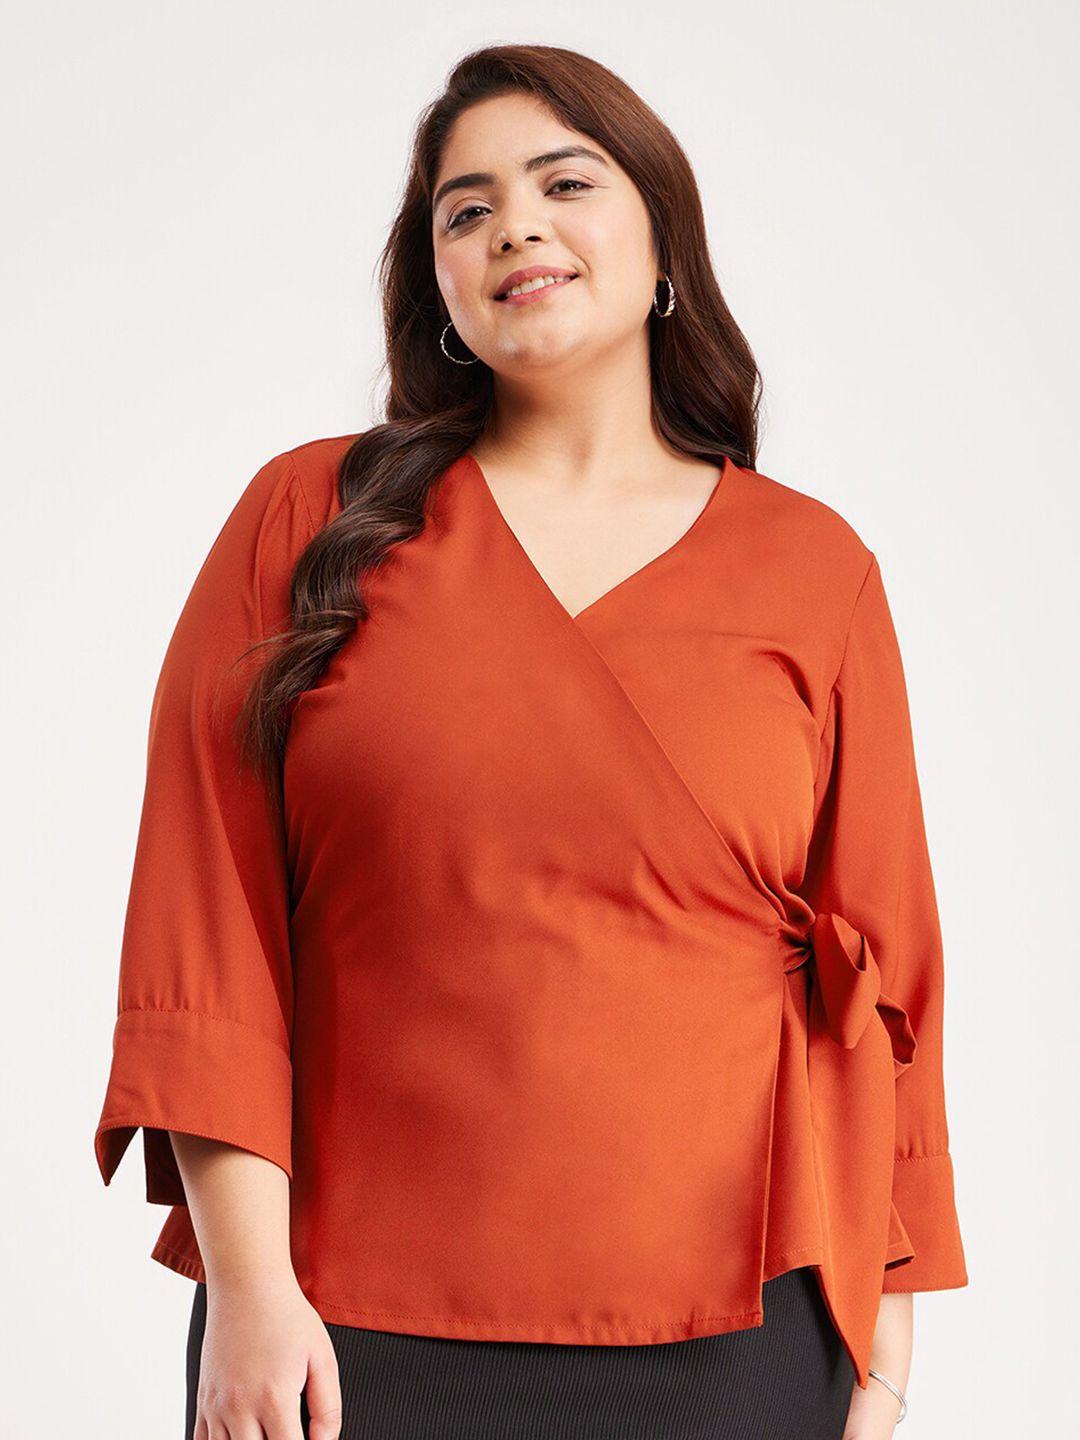 fablestreet x plus size v-neck cuffed sleeve wrap top